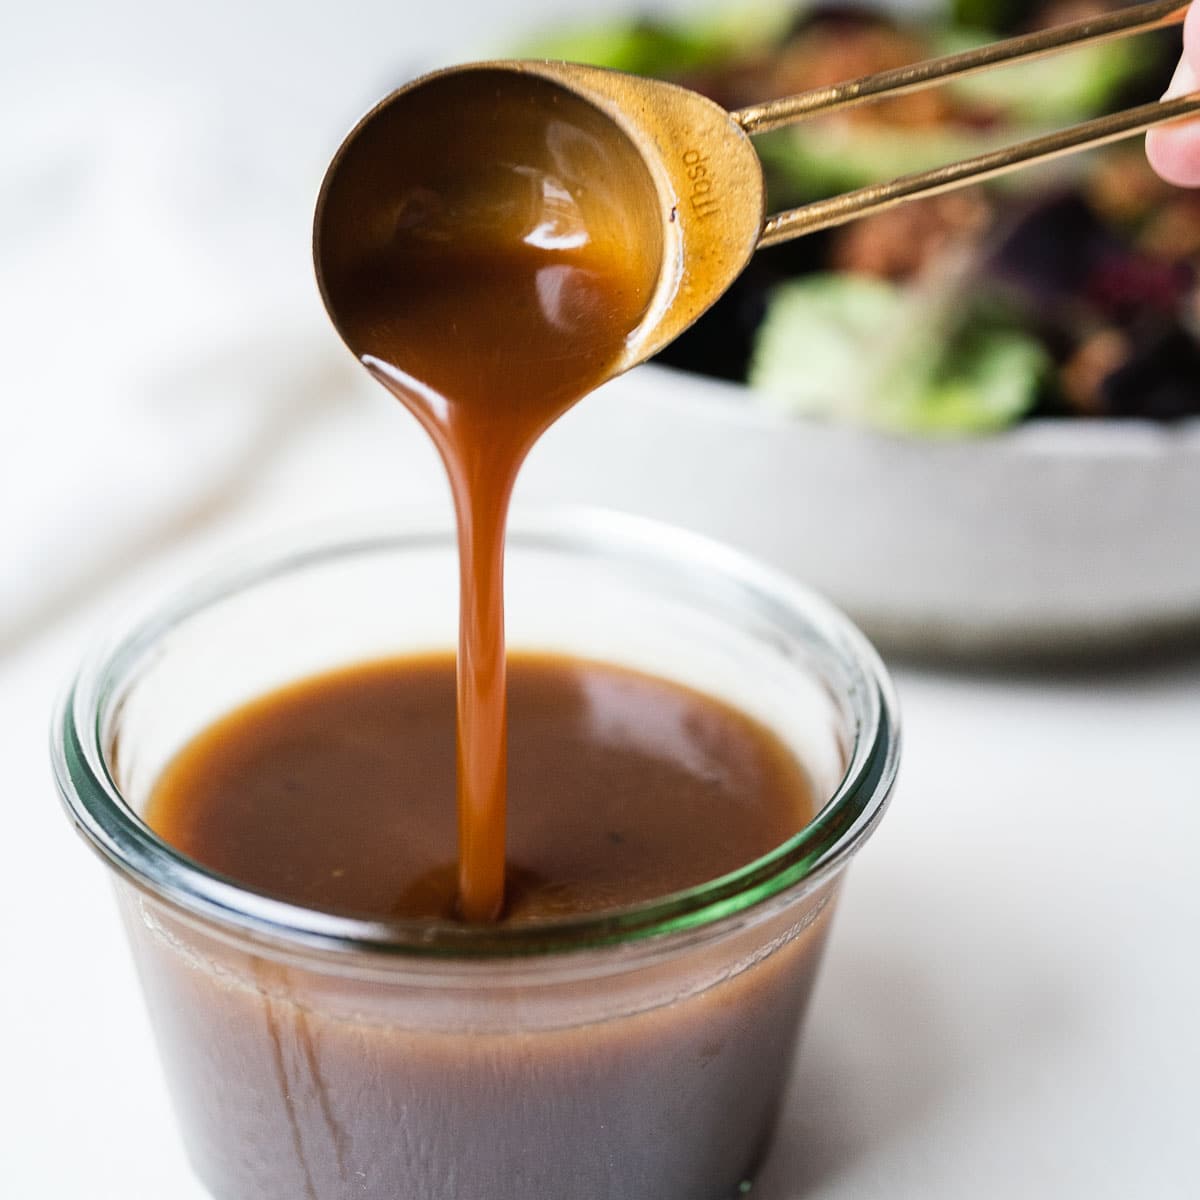 Honey balsamic vinaigrette being spooned out of a clear glass cup.